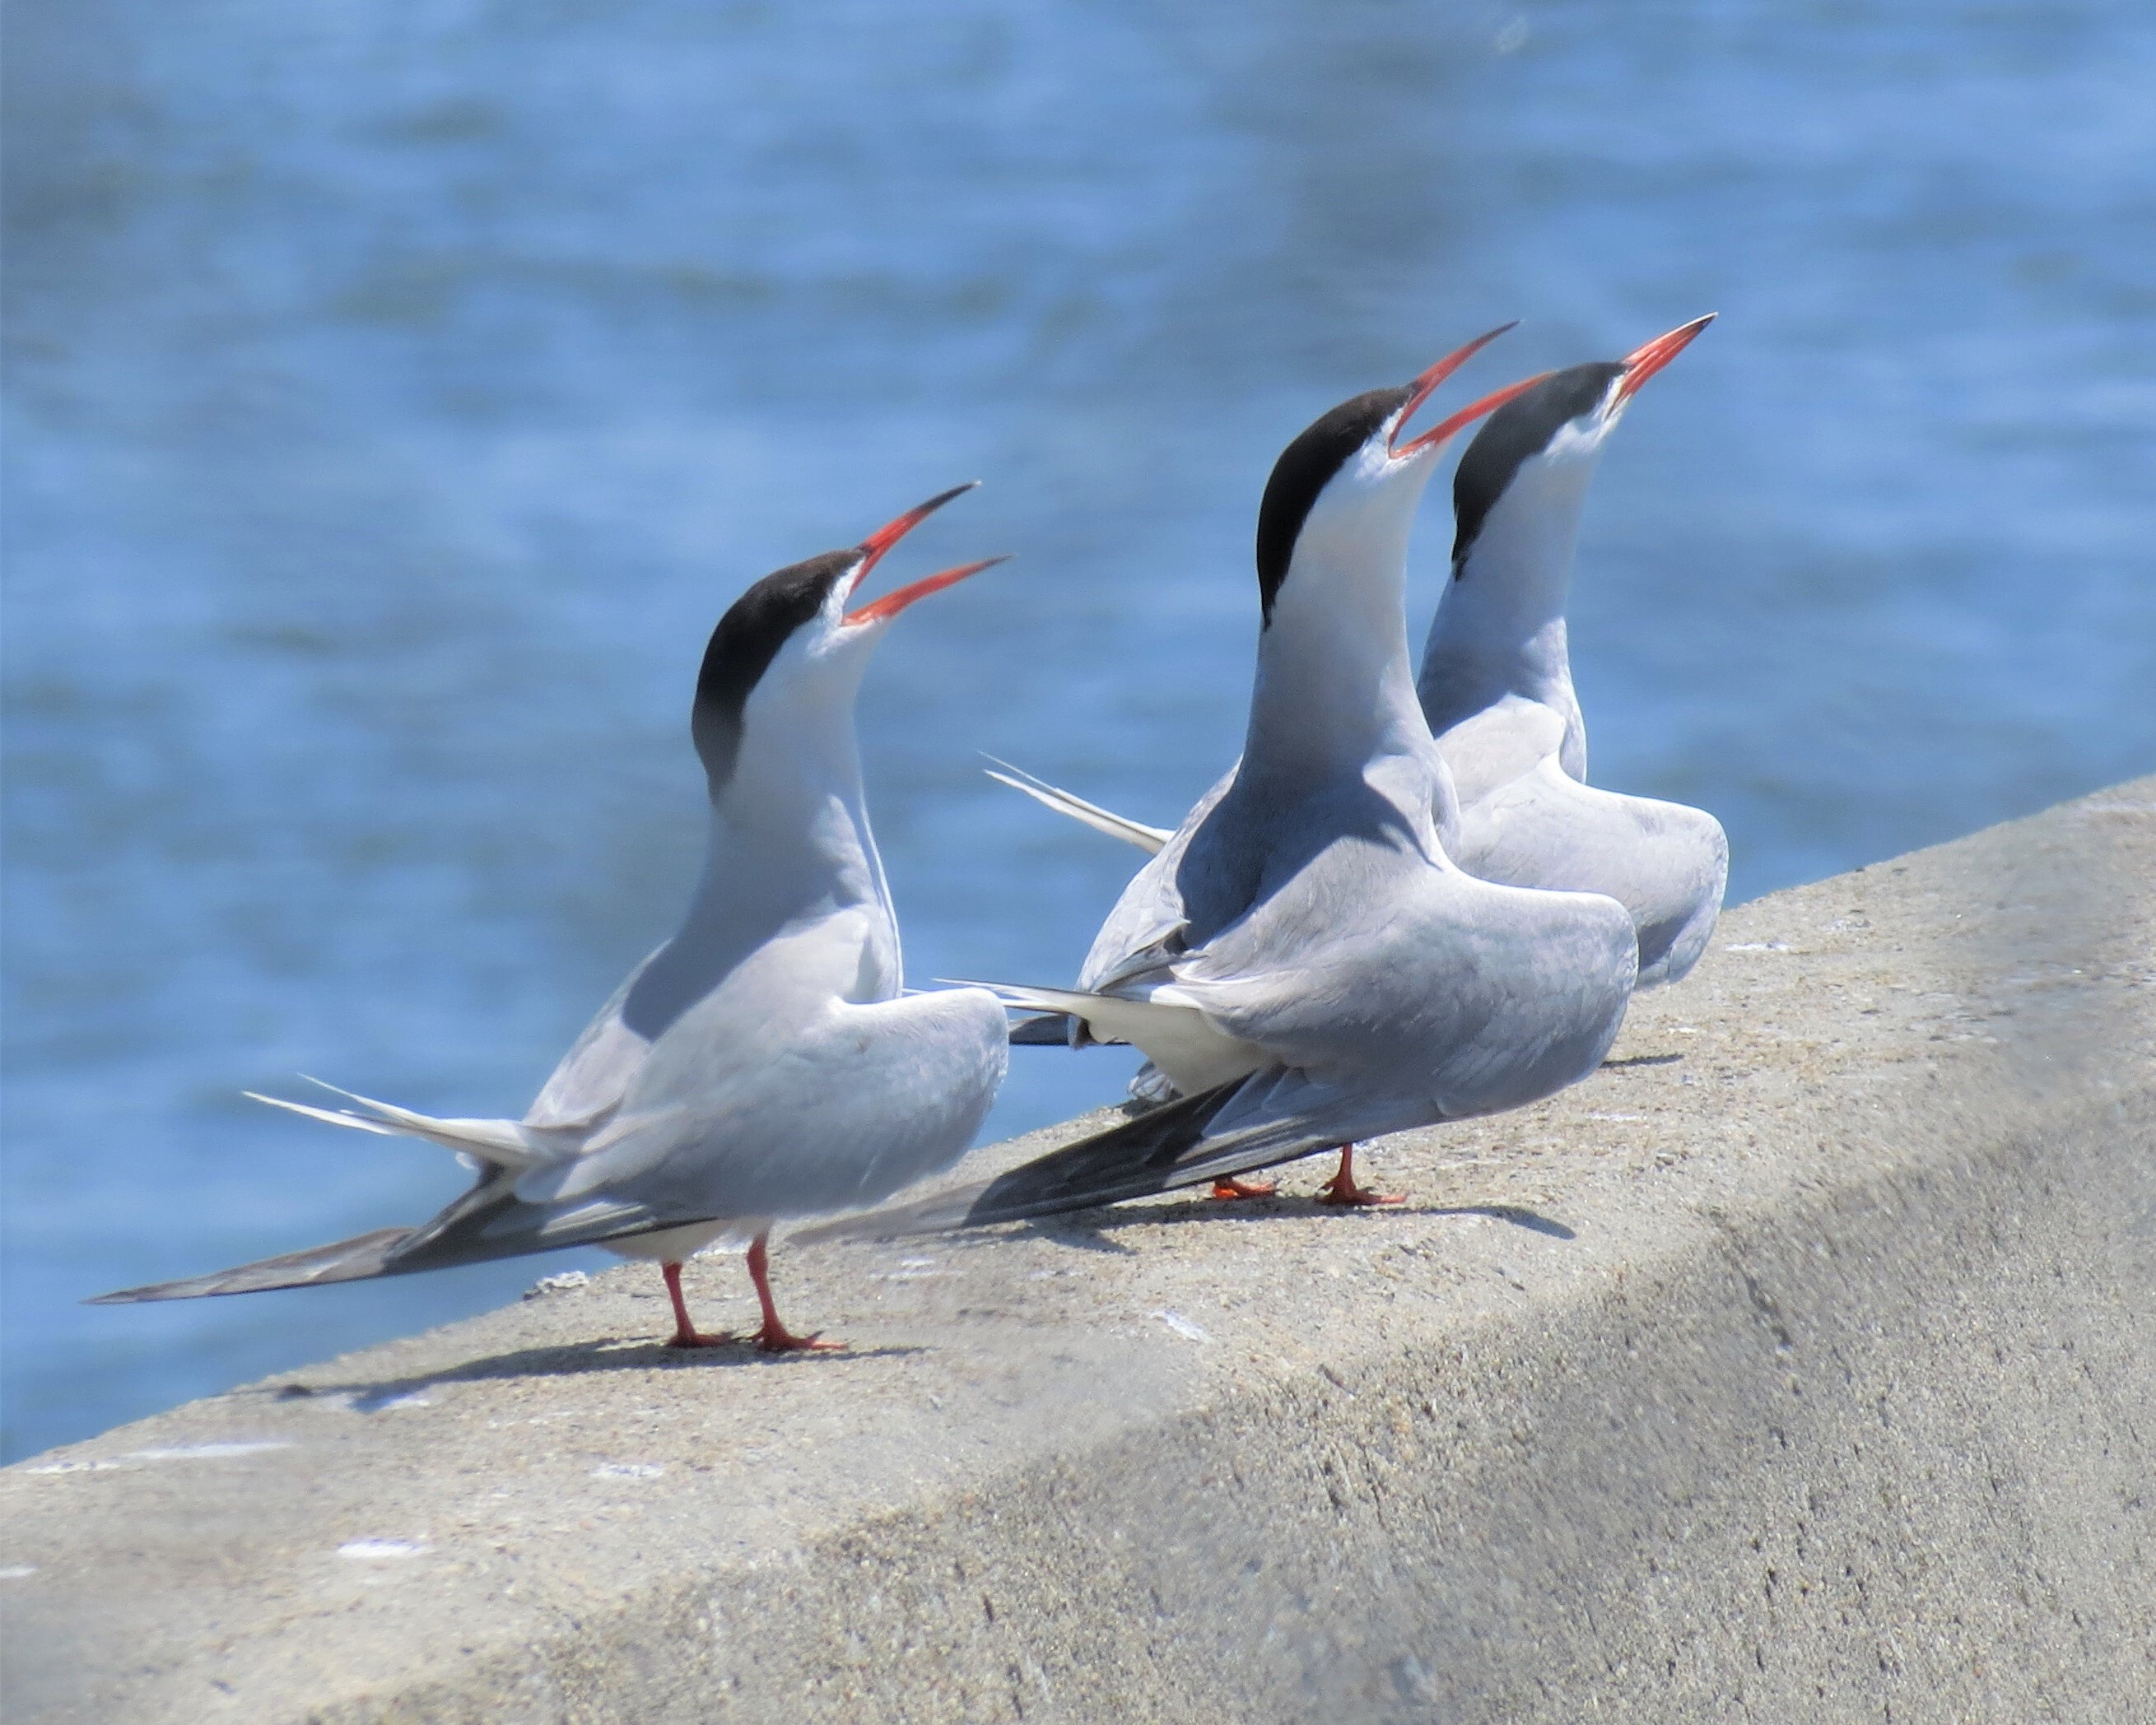 You may encounter Governors Island's nesting Common Terns as you explore the island. Photo: Keith Michael